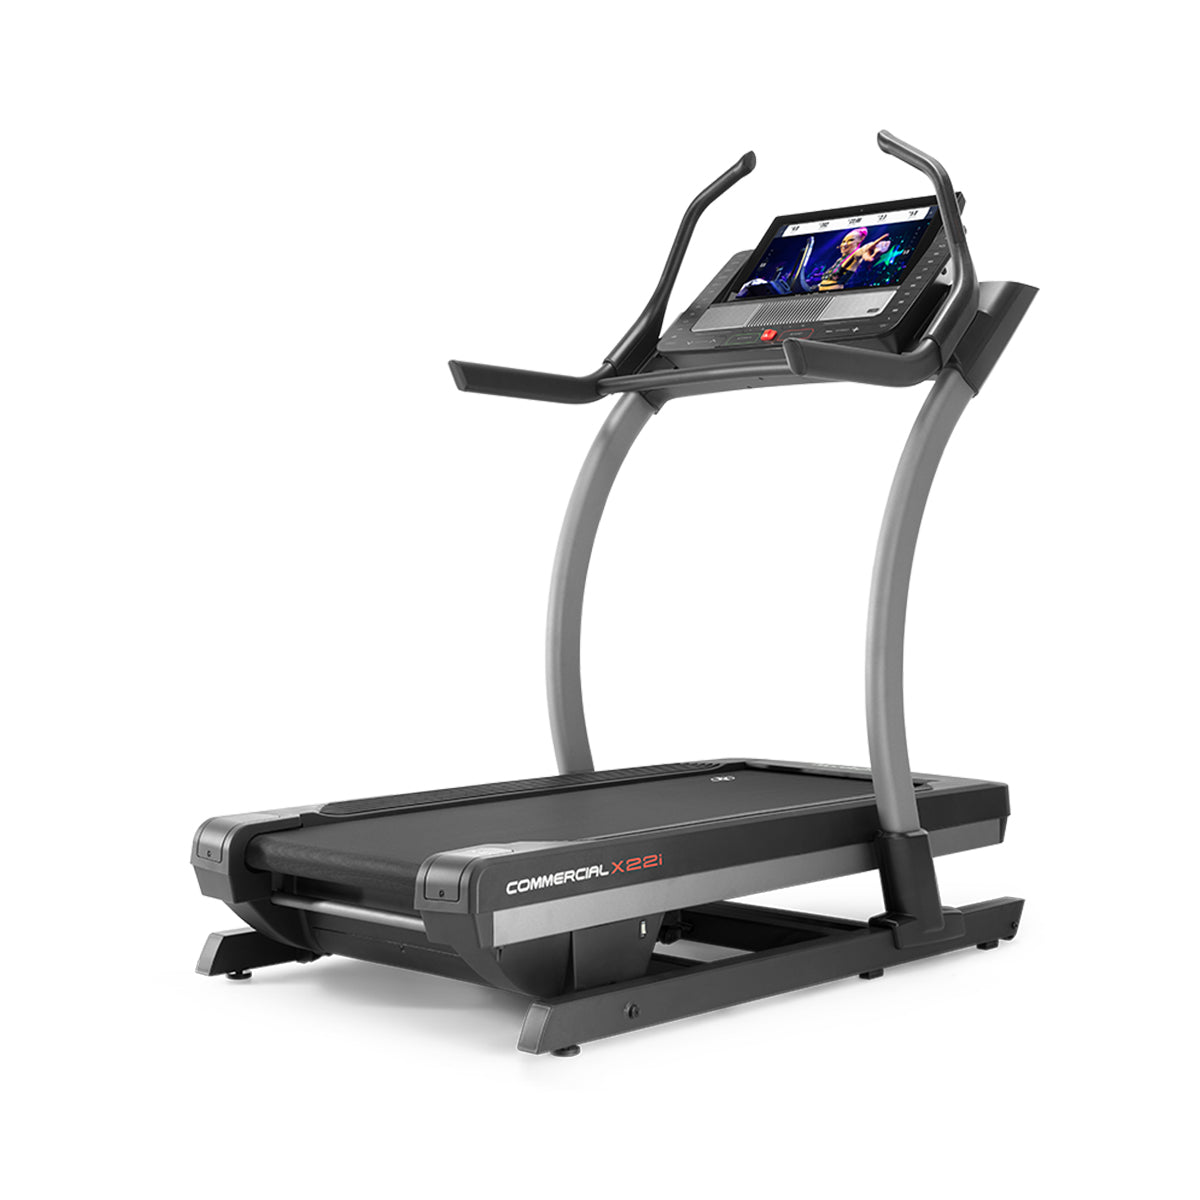 NordicTrack Commercial X 22i Incline